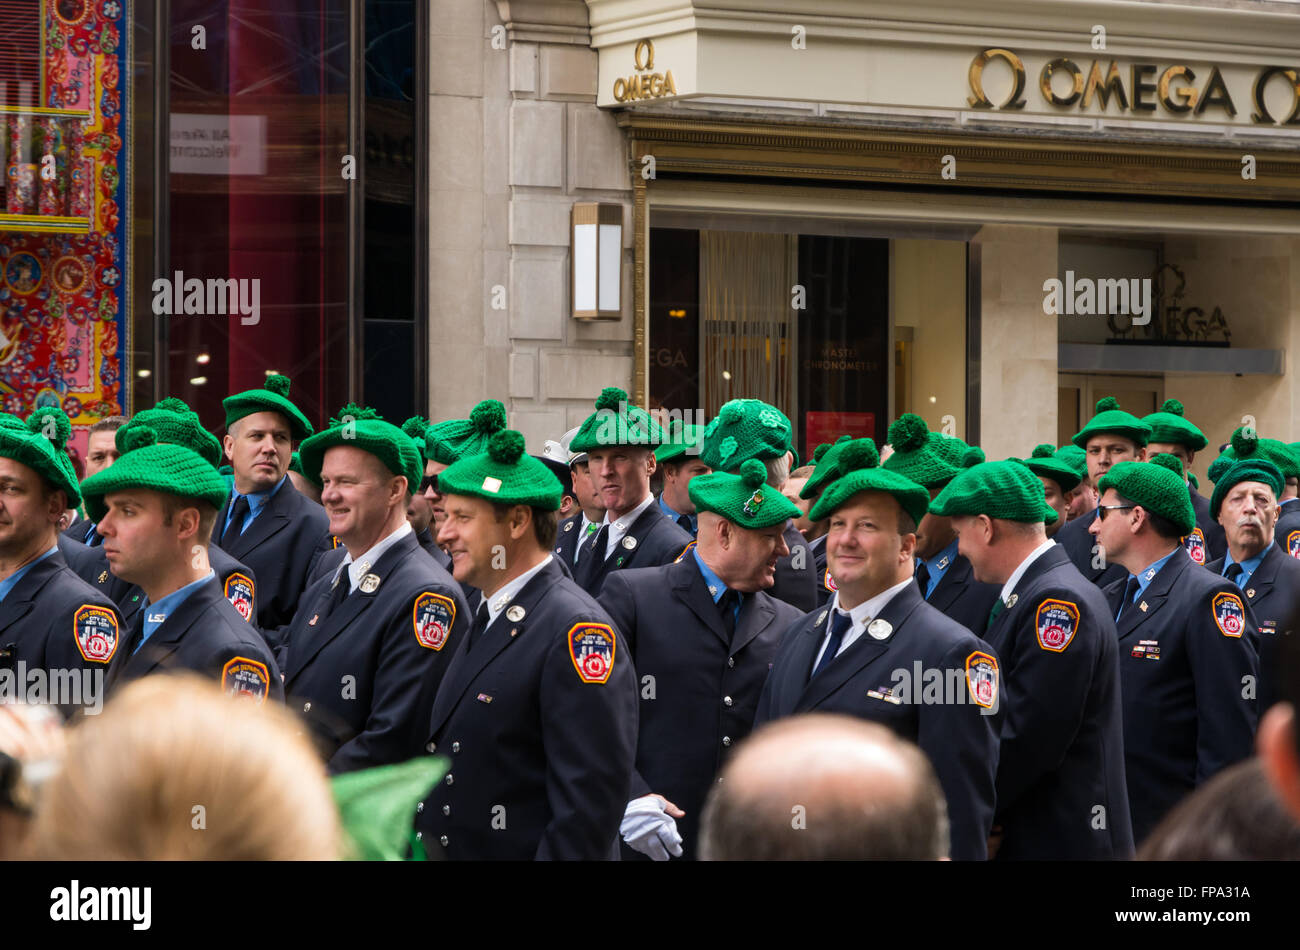 The Fire Department of New York wearing green berets and marching in the 2016 St Patrick's Day celebrations in New York City, USA Stock Photo